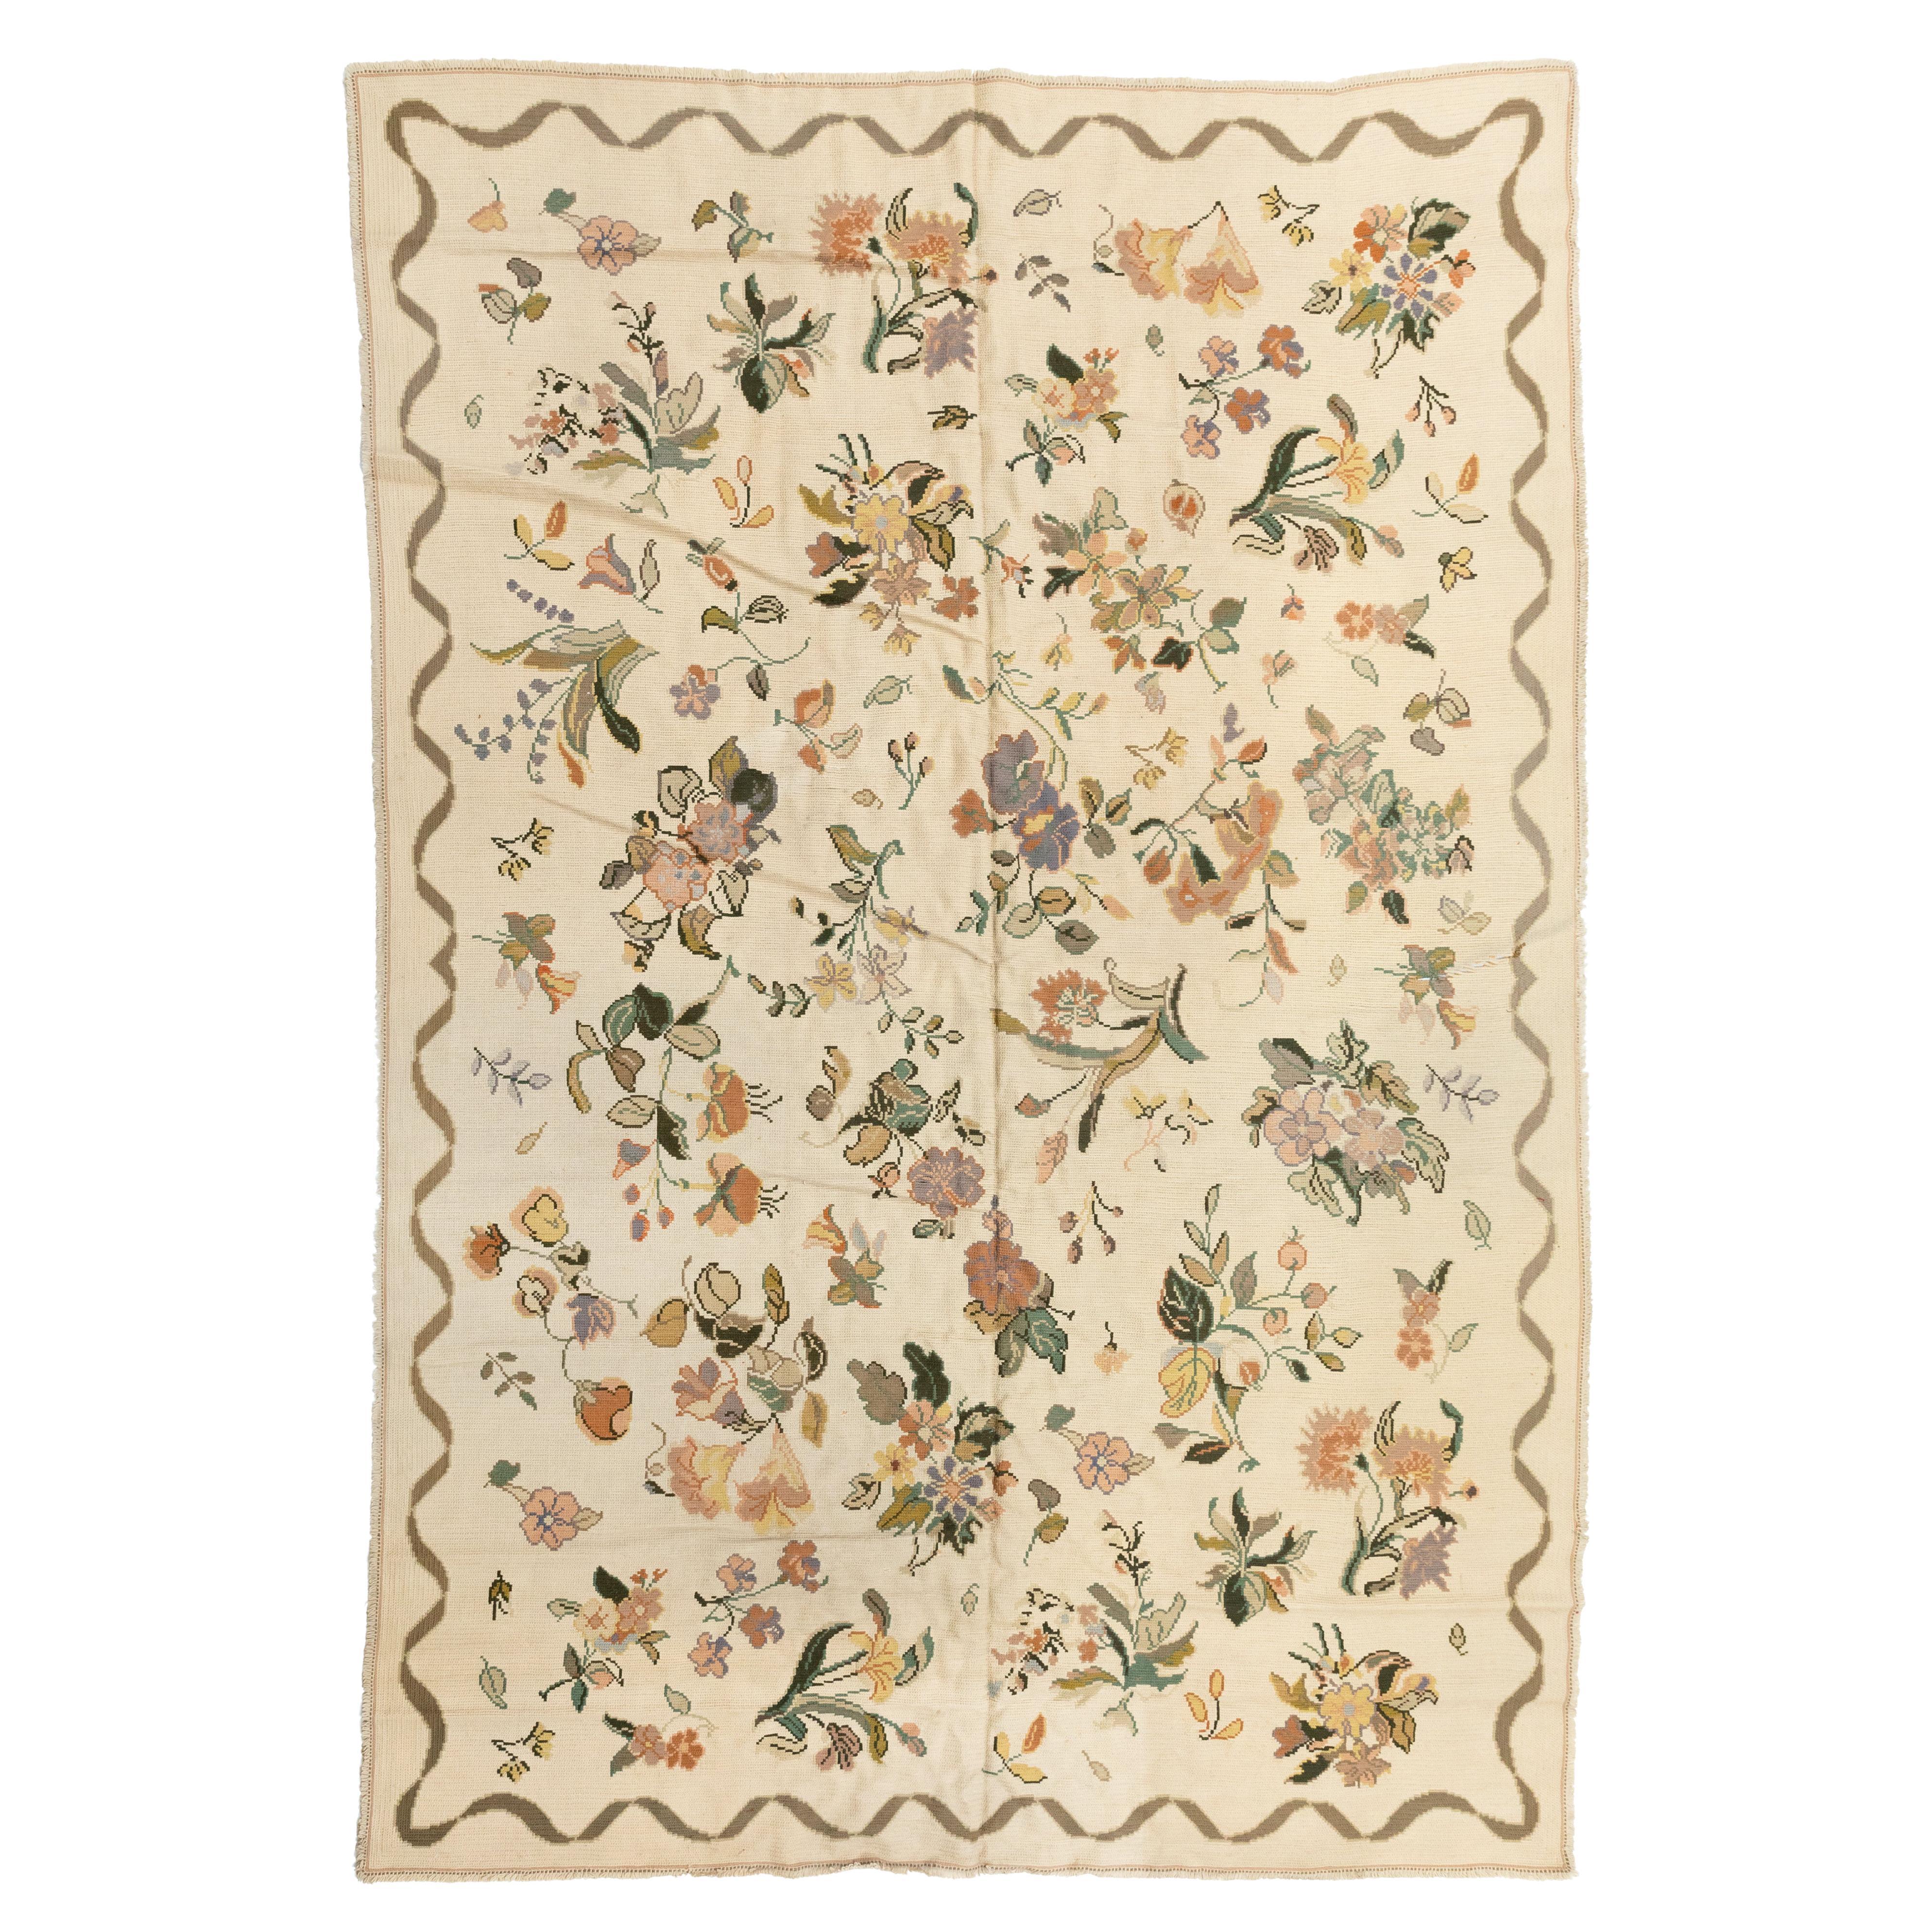 Antique Ivory Portuguese Needlepoint Rug with Flowers, circa 1930-1940s For Sale